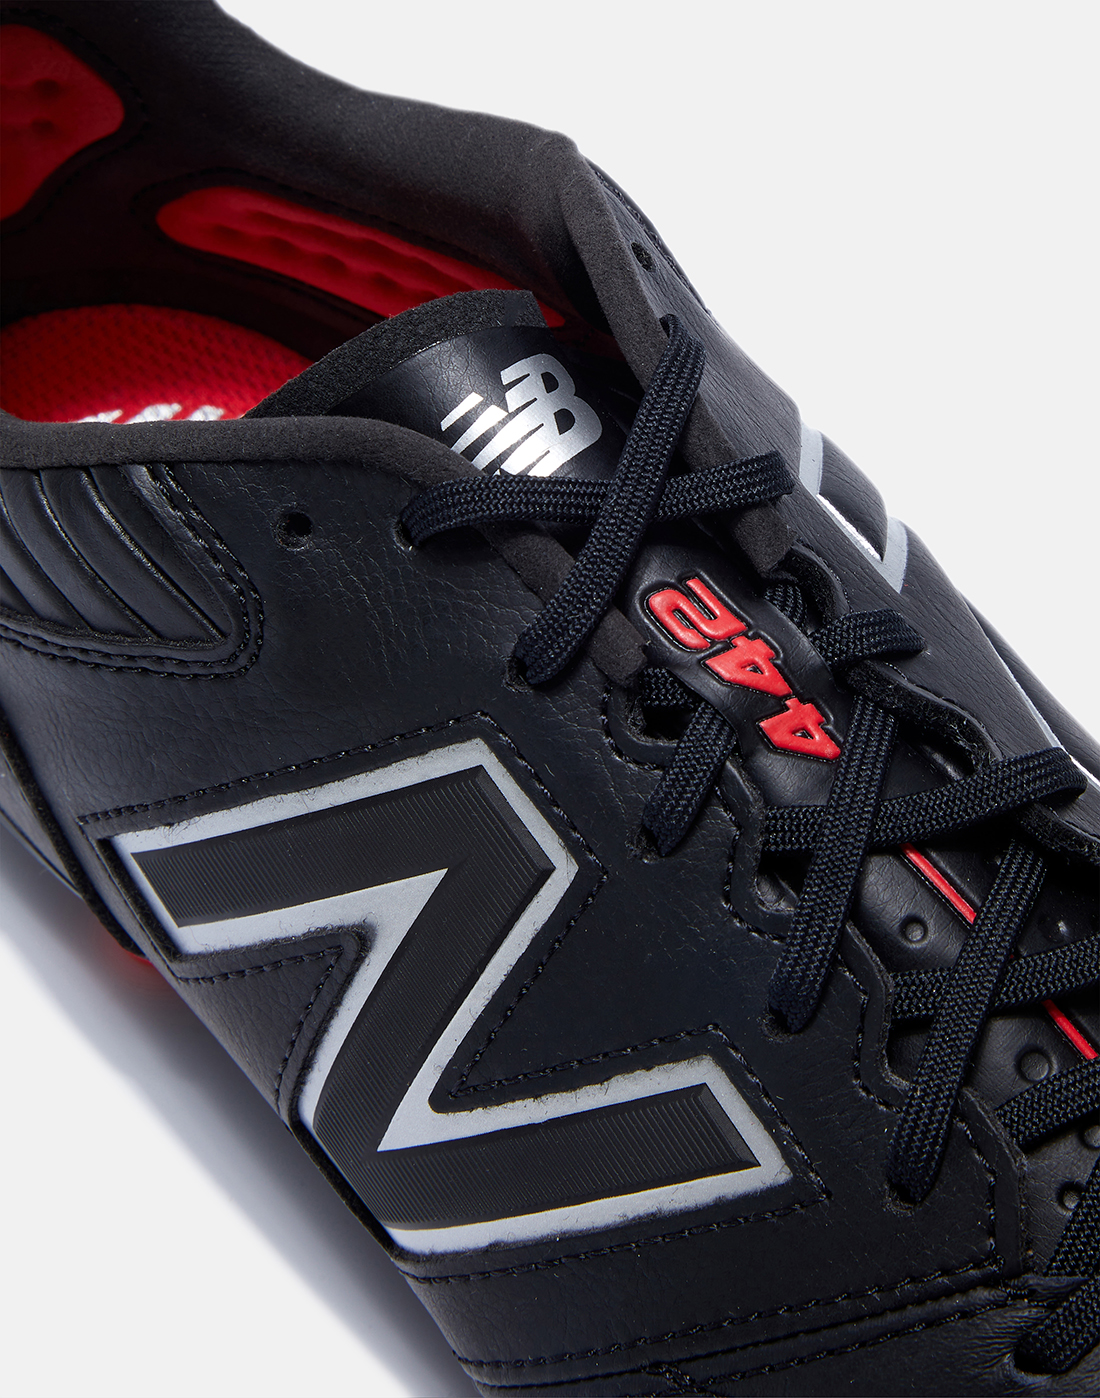 New Balance 442 V2 Pro Wide Rugby Cleat - Firm Ground Boot - Black/Silver -  SKU MS41FBK2-2E - World Rugby Shop